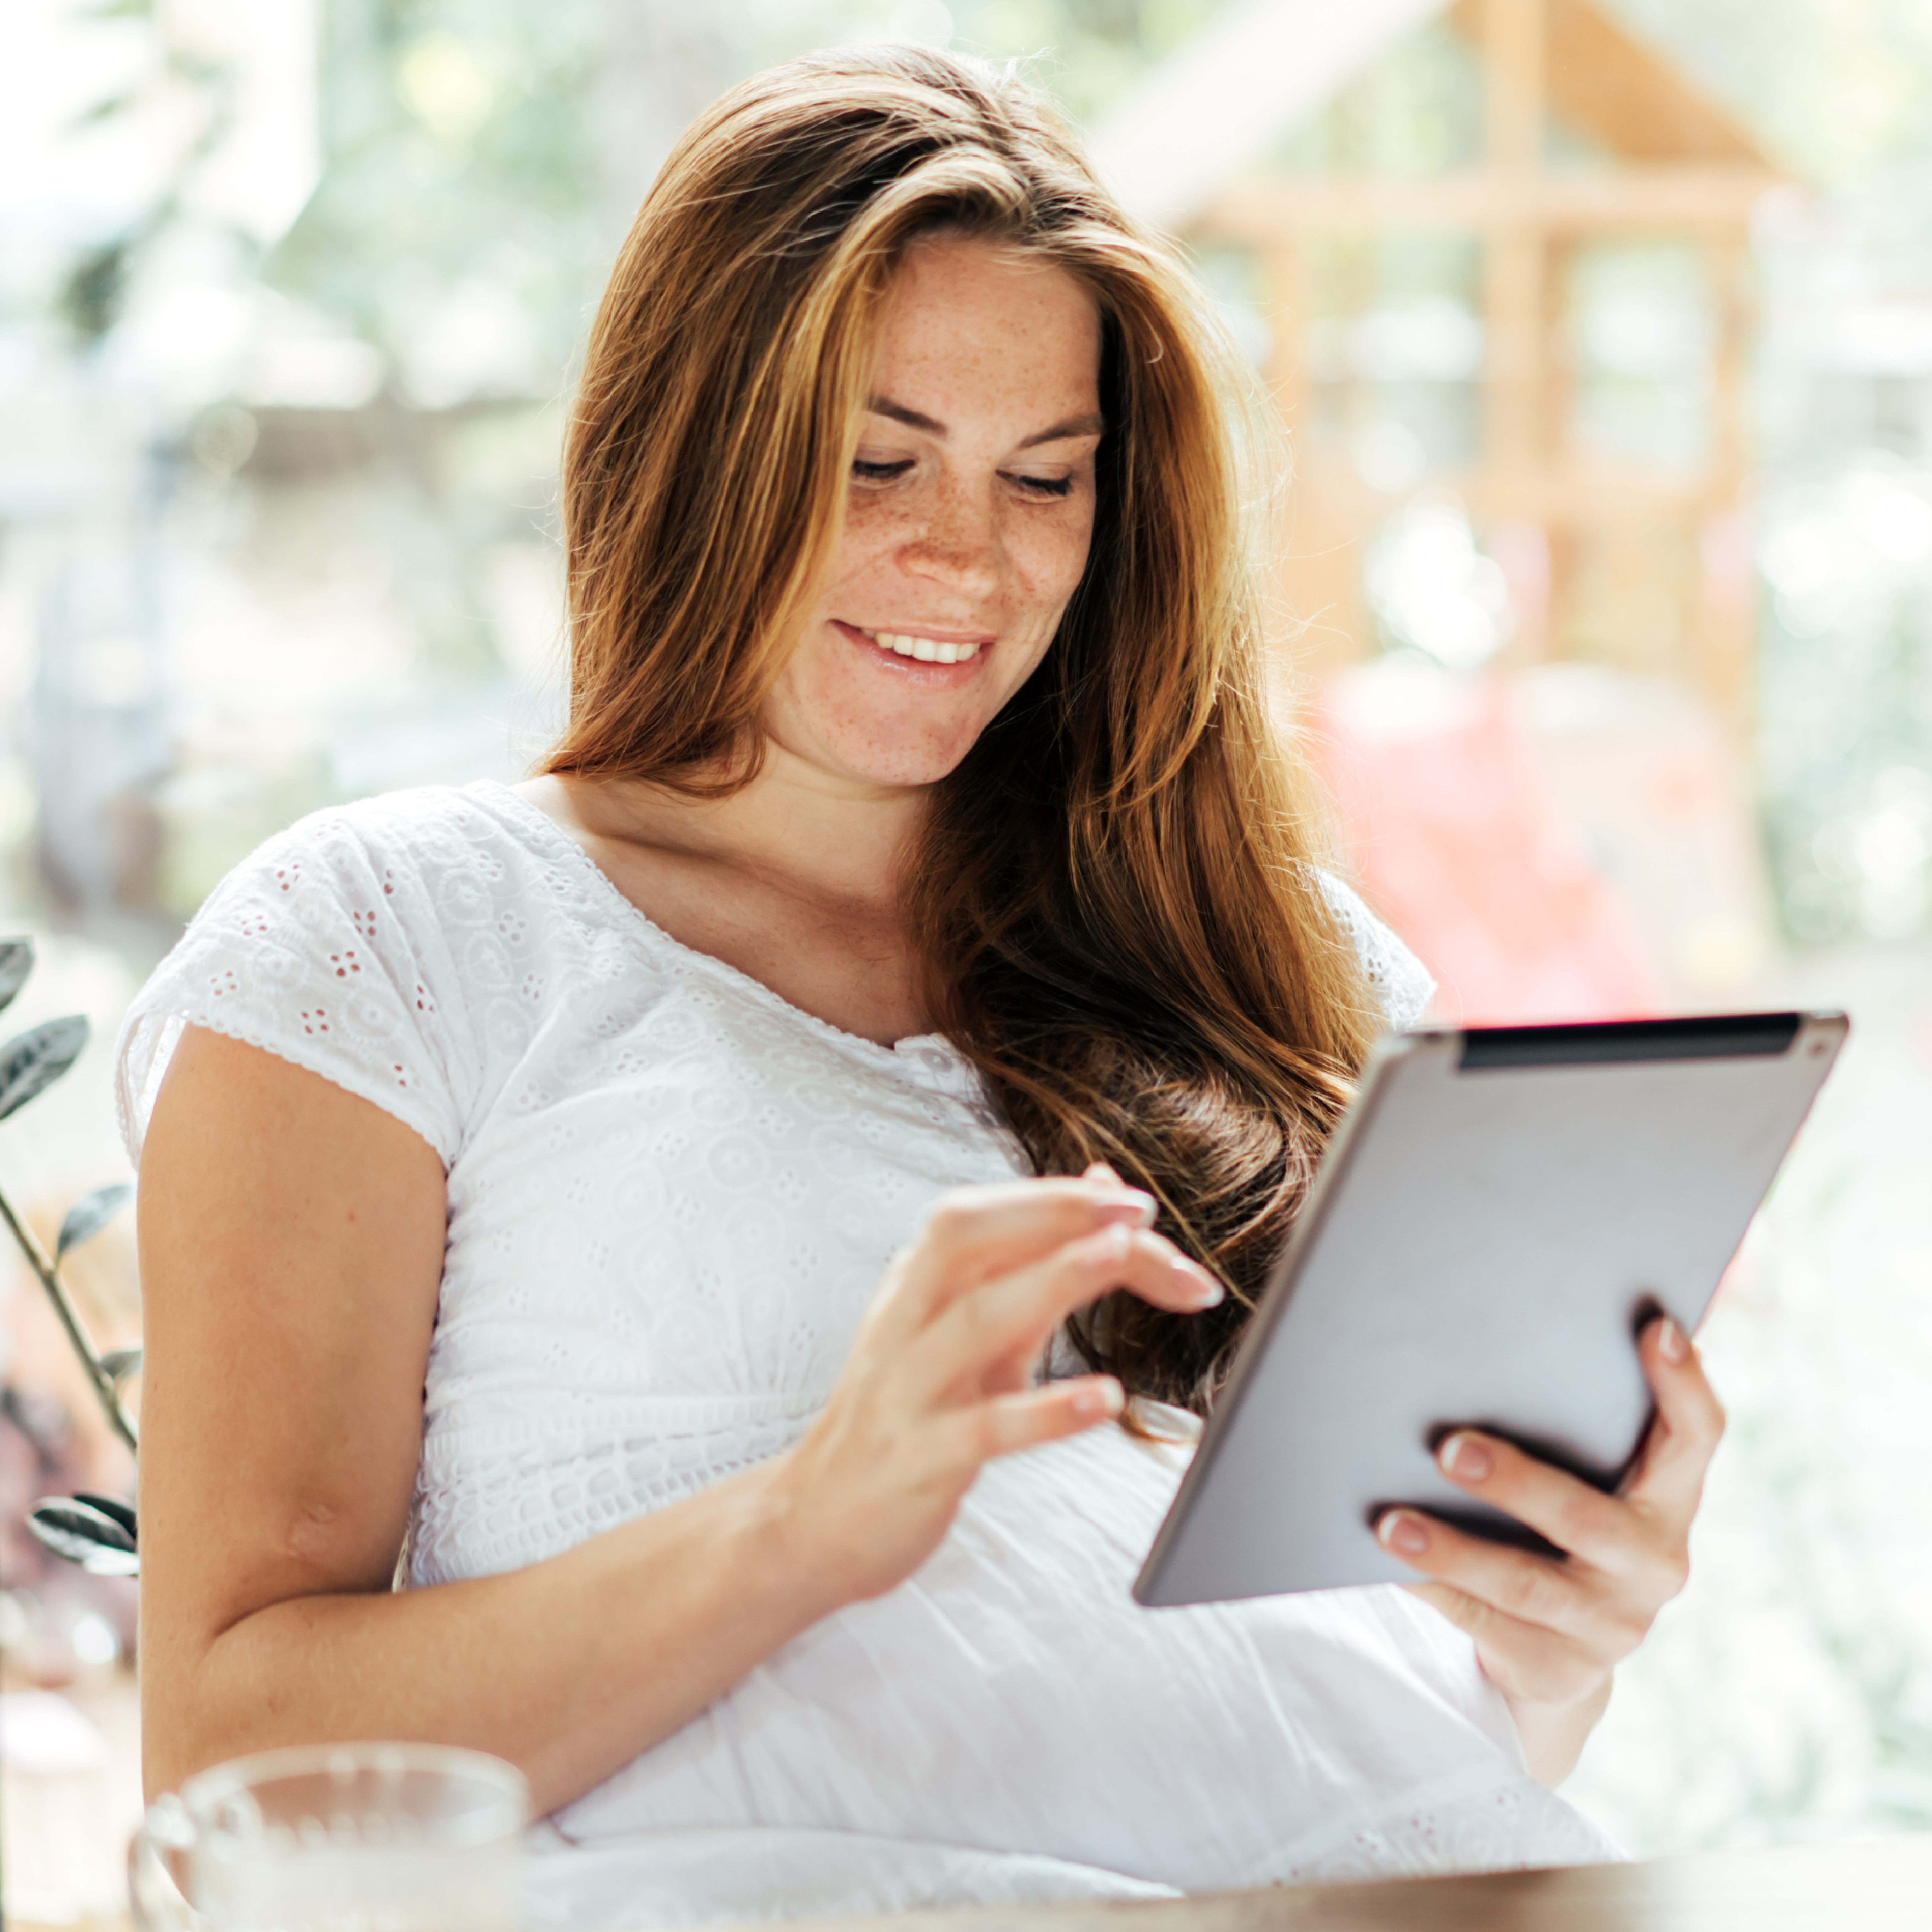 Woman making changes on tablet